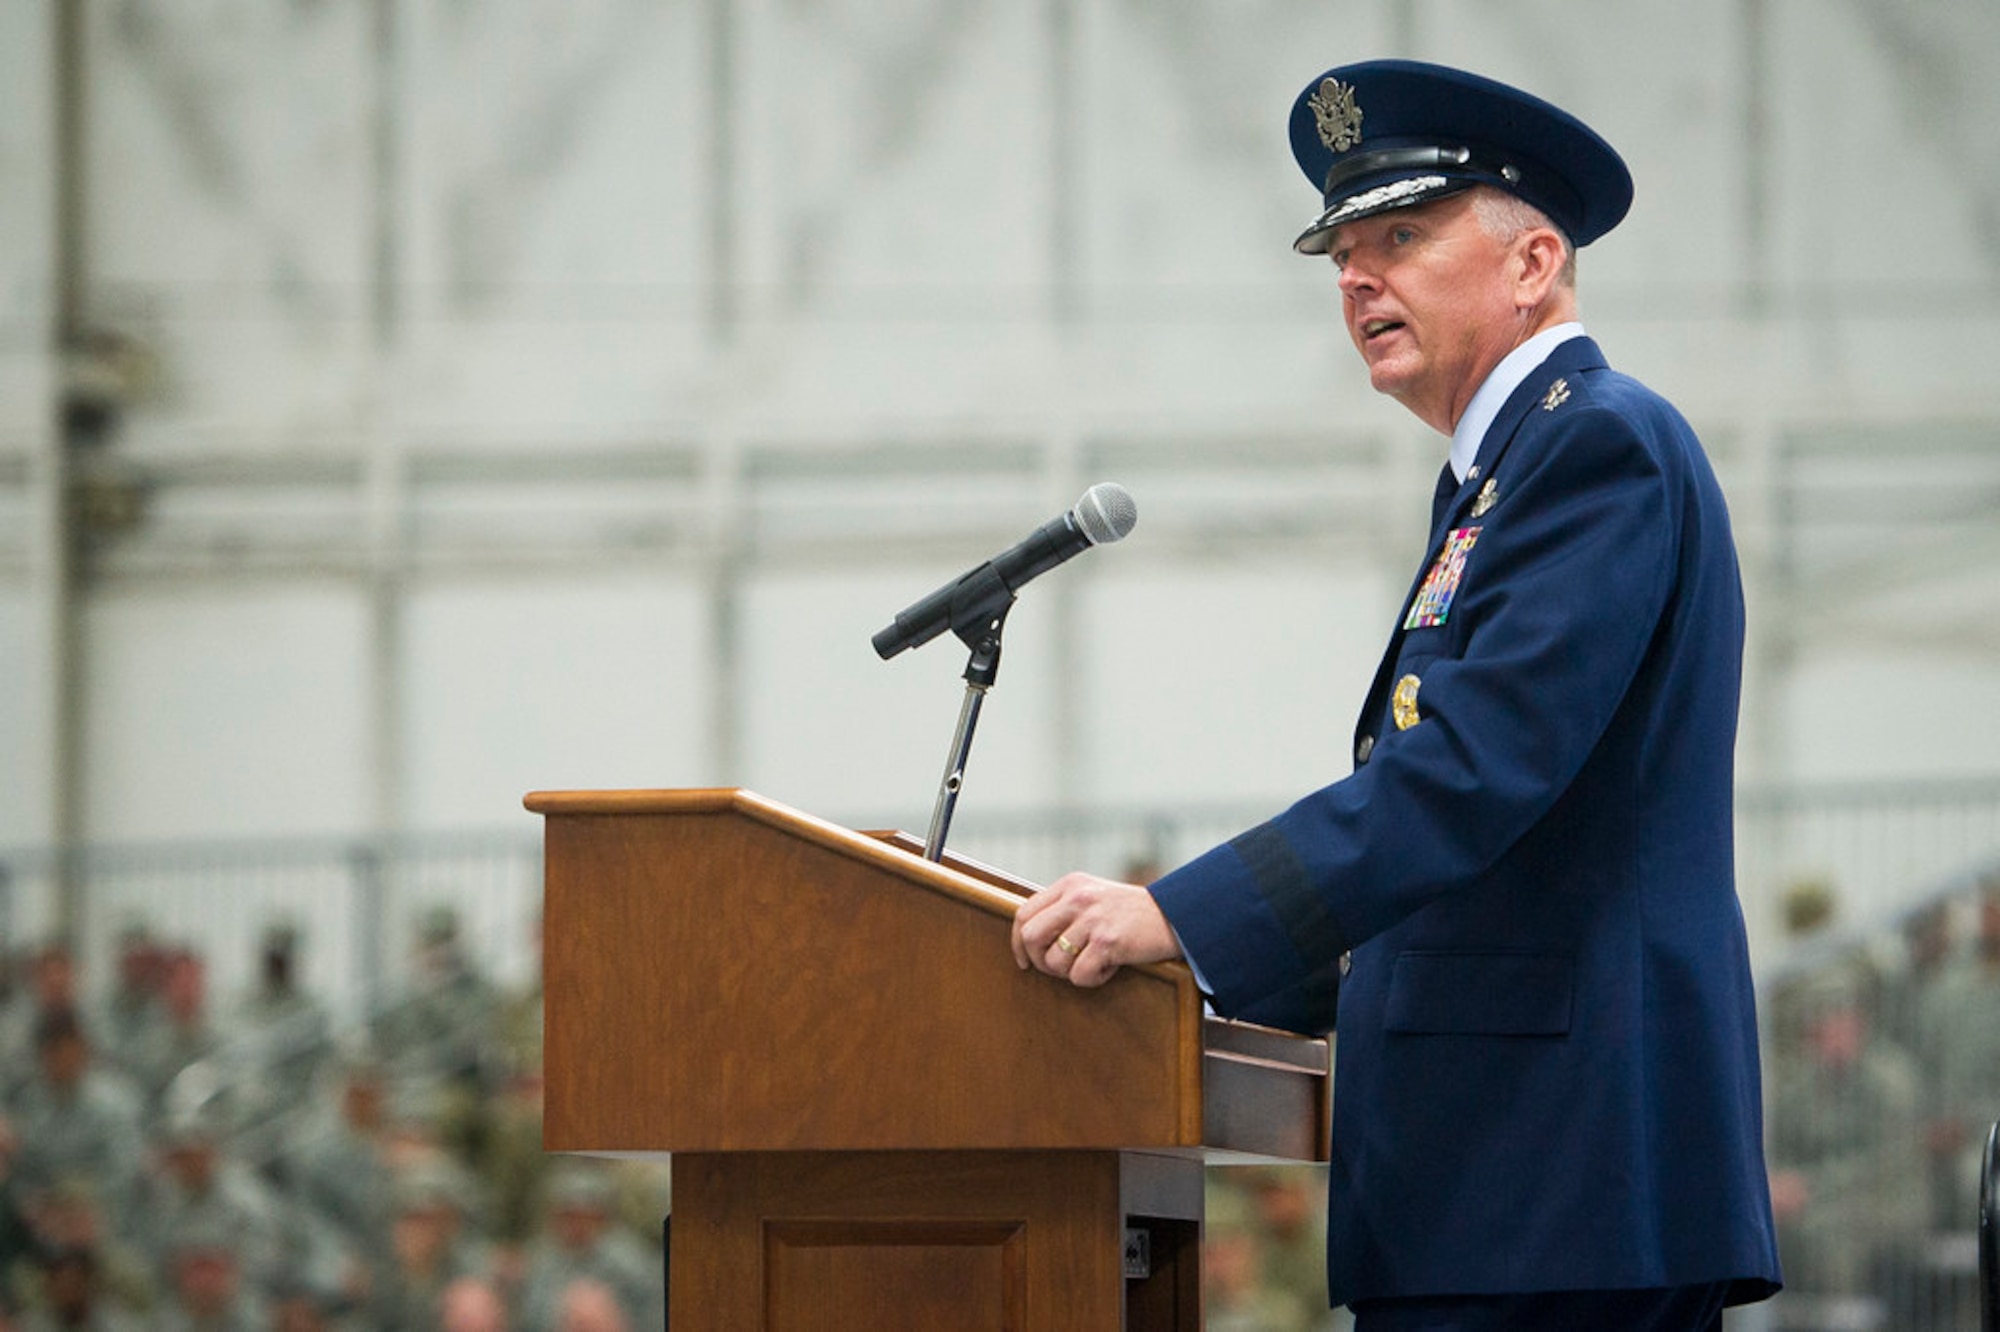 Maj. Gen. Ricky N. Rupp, incoming Air Force District of Washington commander, speaks to guests during the AFDW Change of Command Ceremony at Joint Base Andrews, Md., July 9, 2019. (U.S. Air Force photo by Master Sgt. Michael B. Keller)